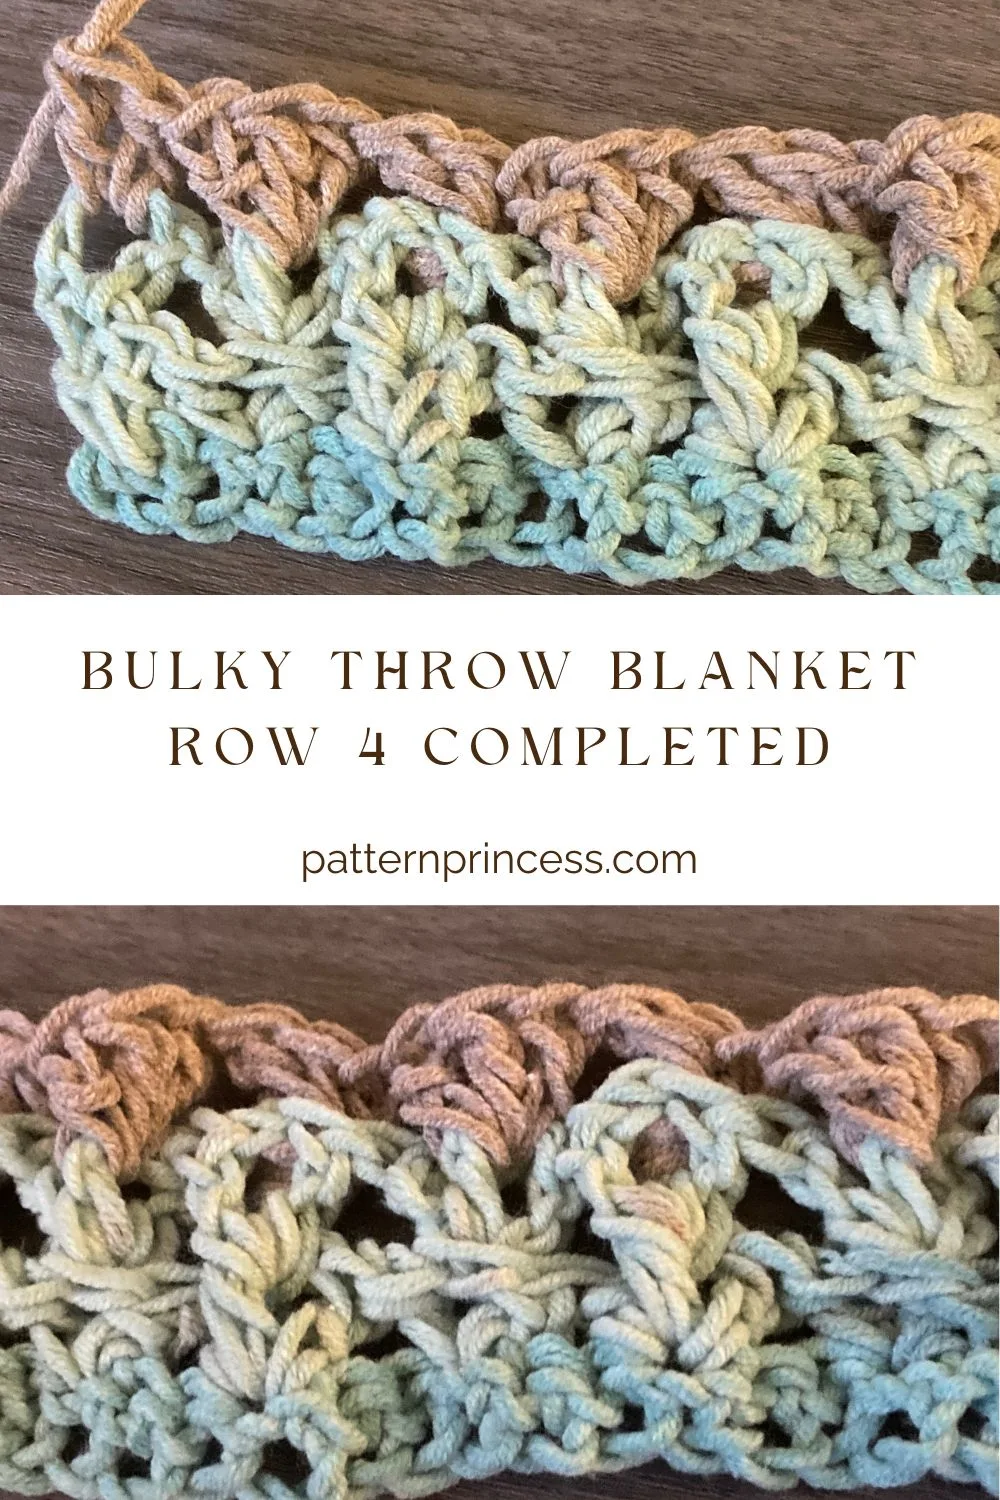 Bulky Throw Blanket row 4 completed